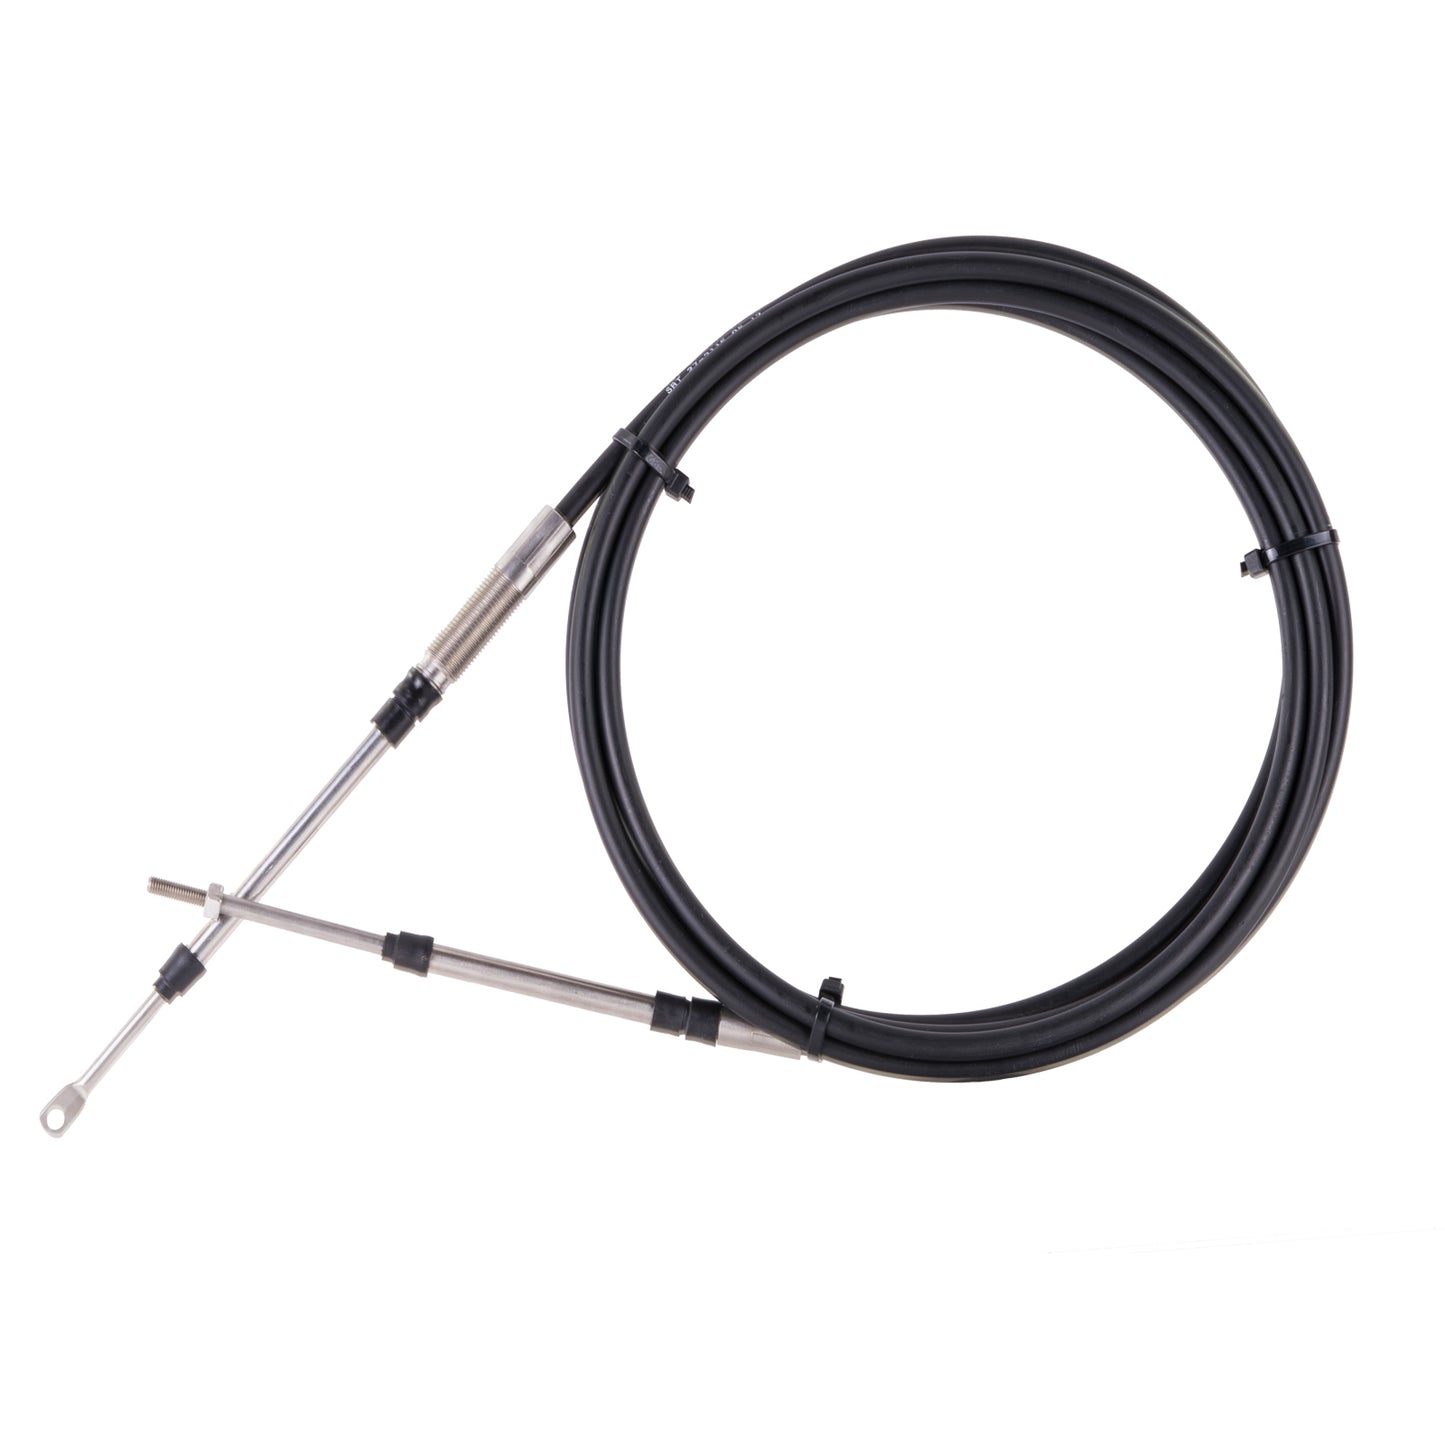 SBT Sea Doo Jet Boat Reverse/Shift Cable Challenger 310 /Challenger 430 /Wake 204170268 2010